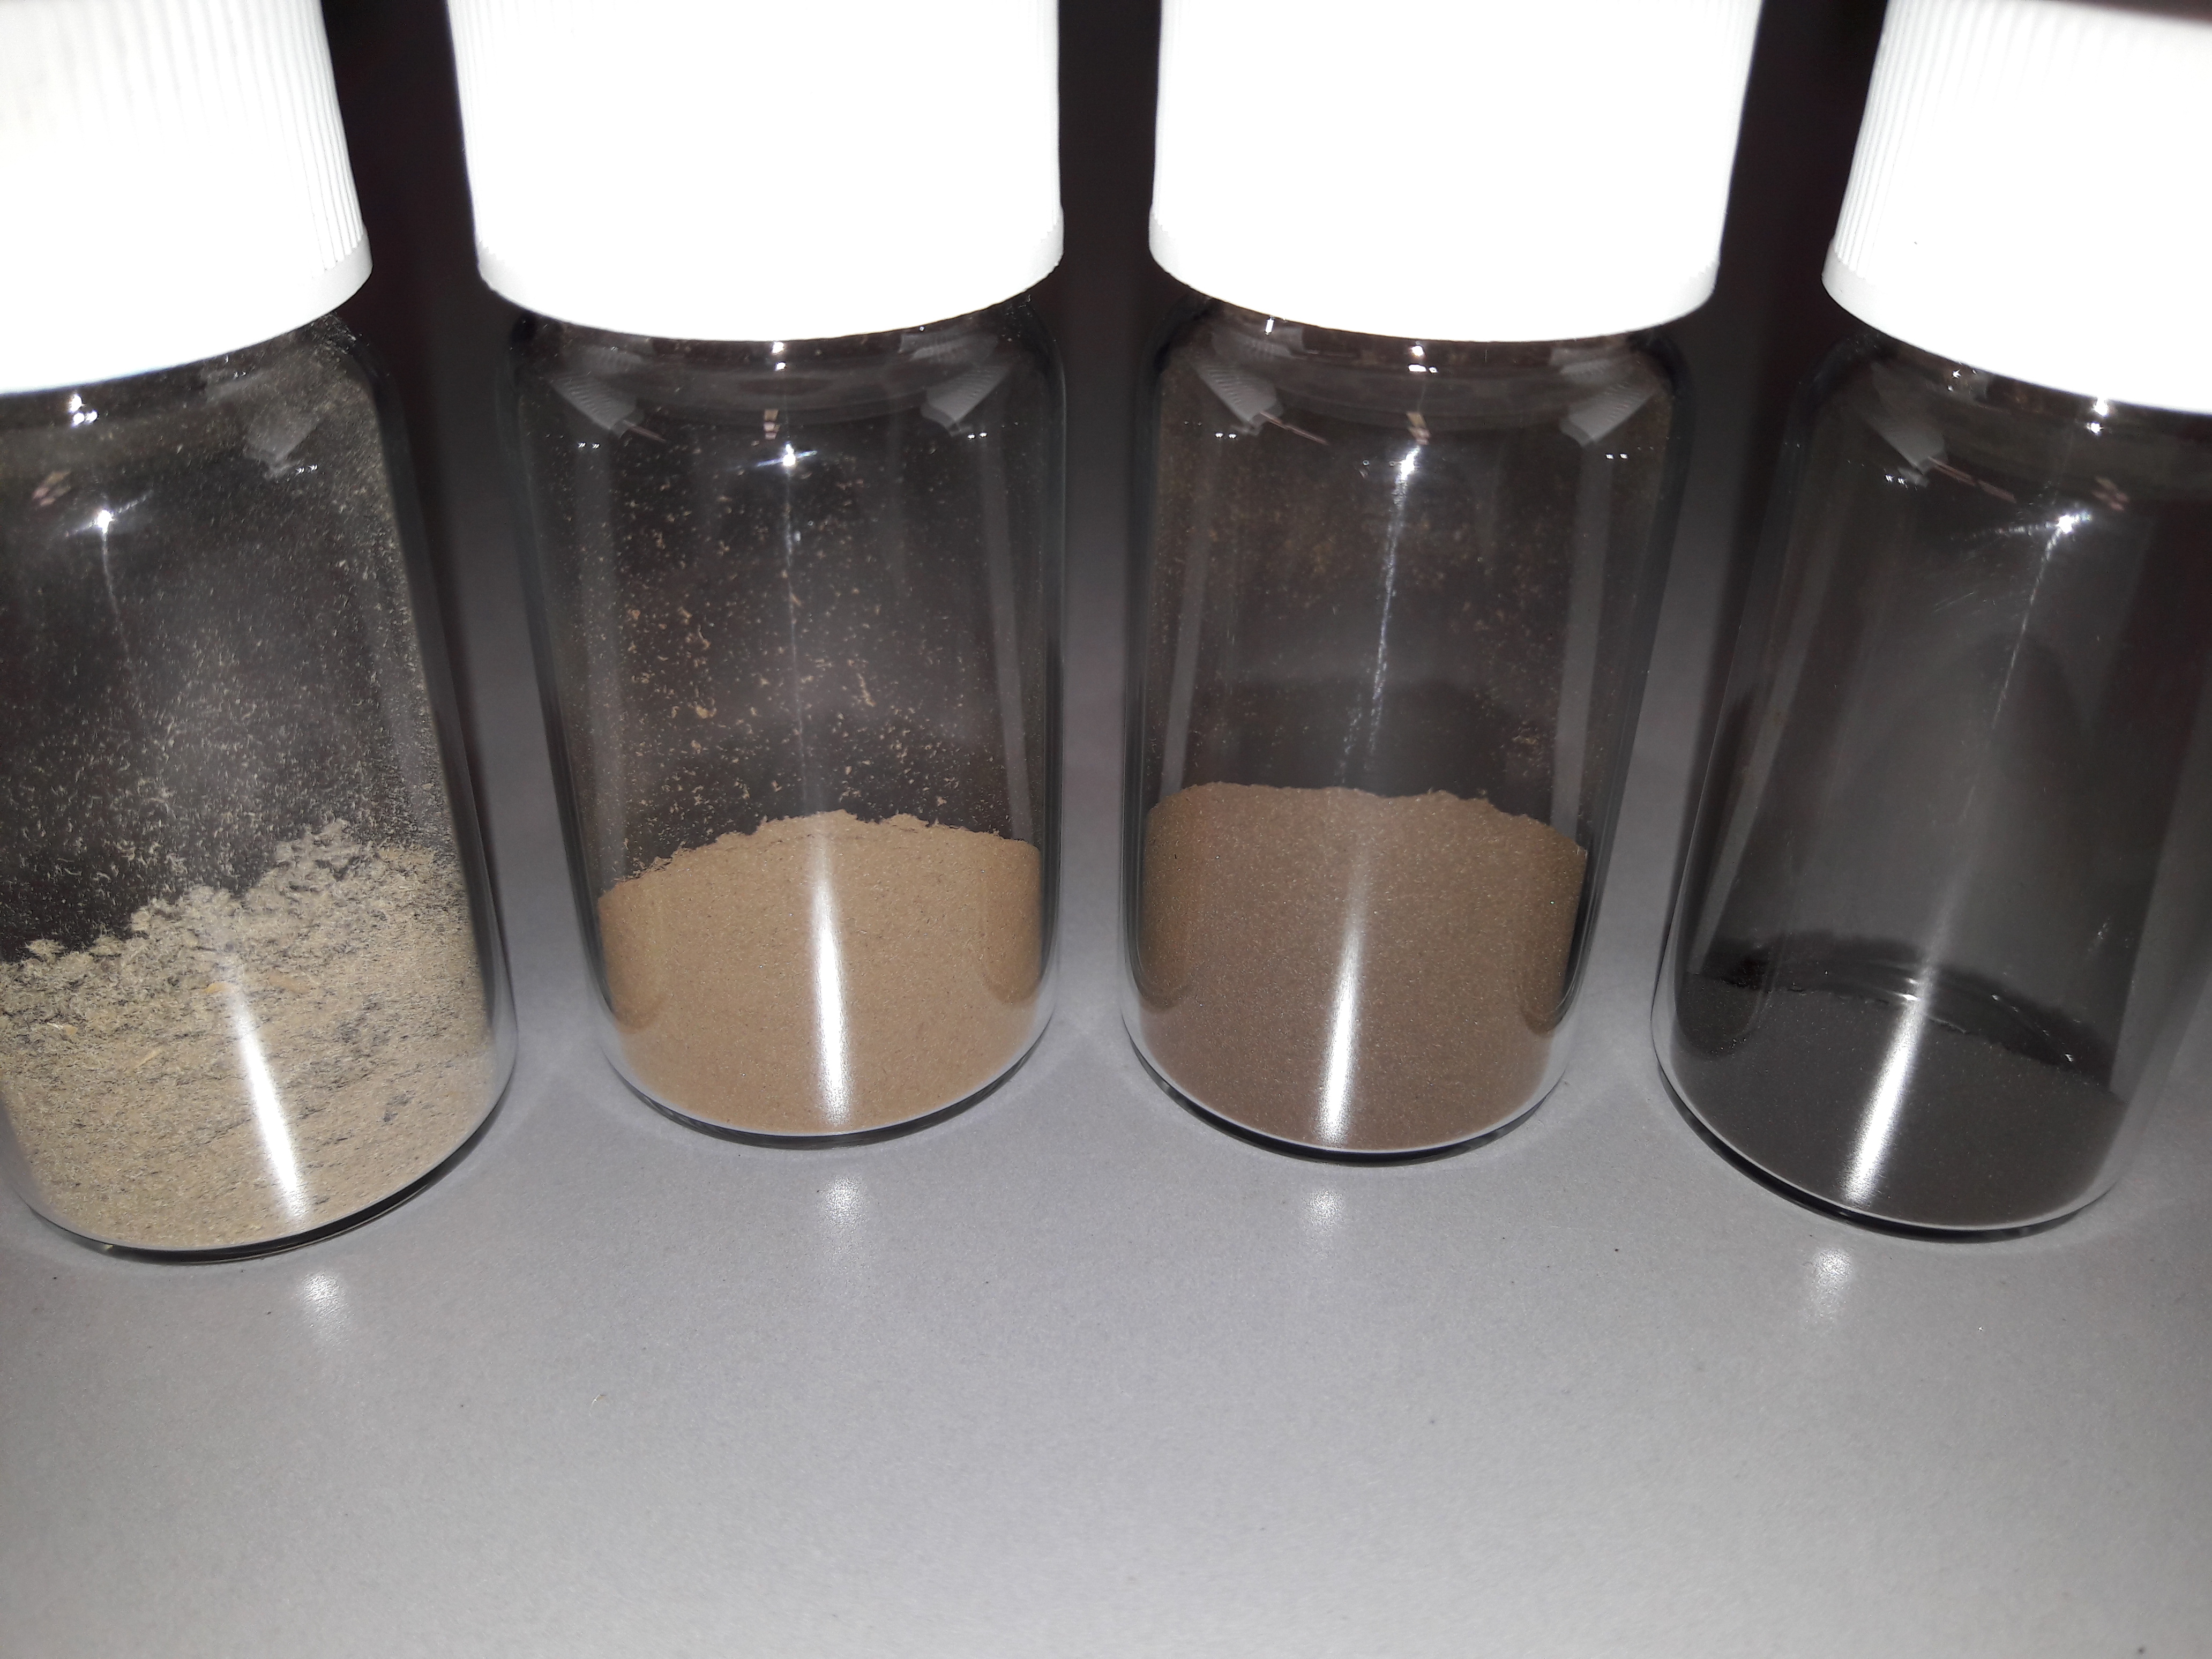 HTC-treated sewage sludge at different temperatures, dried (left to right: untreated, 190 °C, 220 °C, 250 °C). © TU Darmstadt, T. Blach